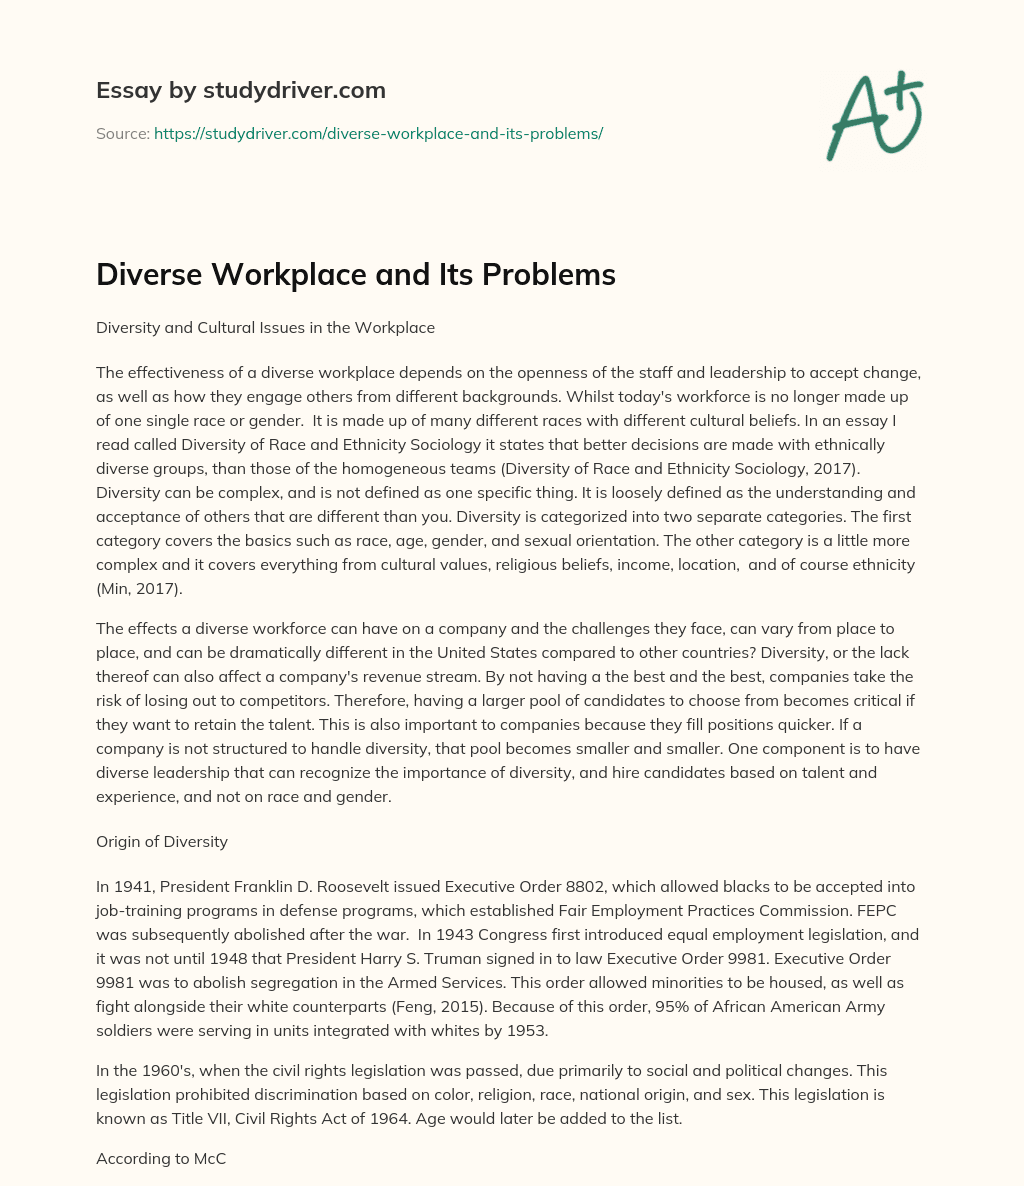 Diverse Workplace and its Problems essay